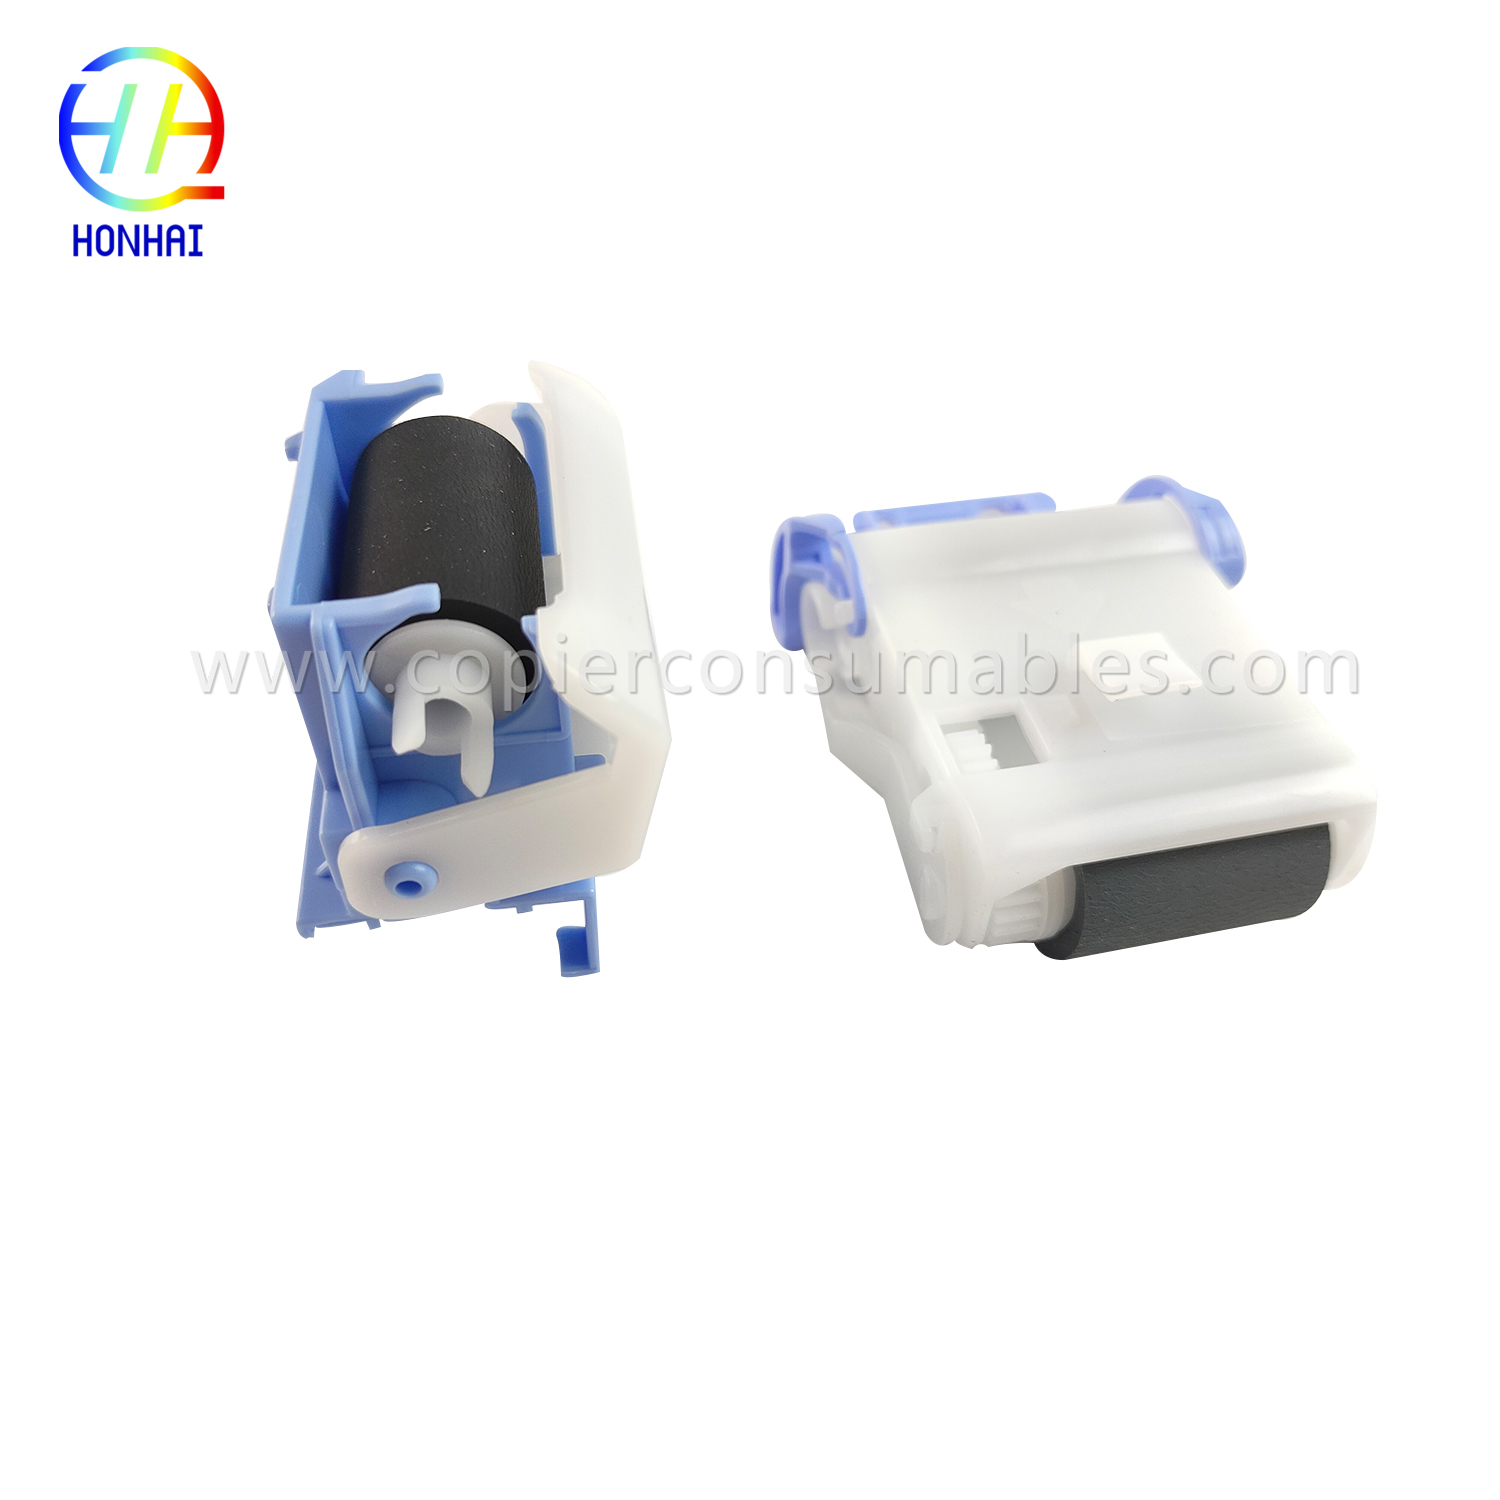 Popular Design for Brother Mfc L27500w - Separation & Pickup Feed Assemblies Tray 2 for HP Laserjet Enterprise M607 Laserjet Enterprise M608 M609 M631 M632 M633 J8J70-67904 OEM – HONHAI